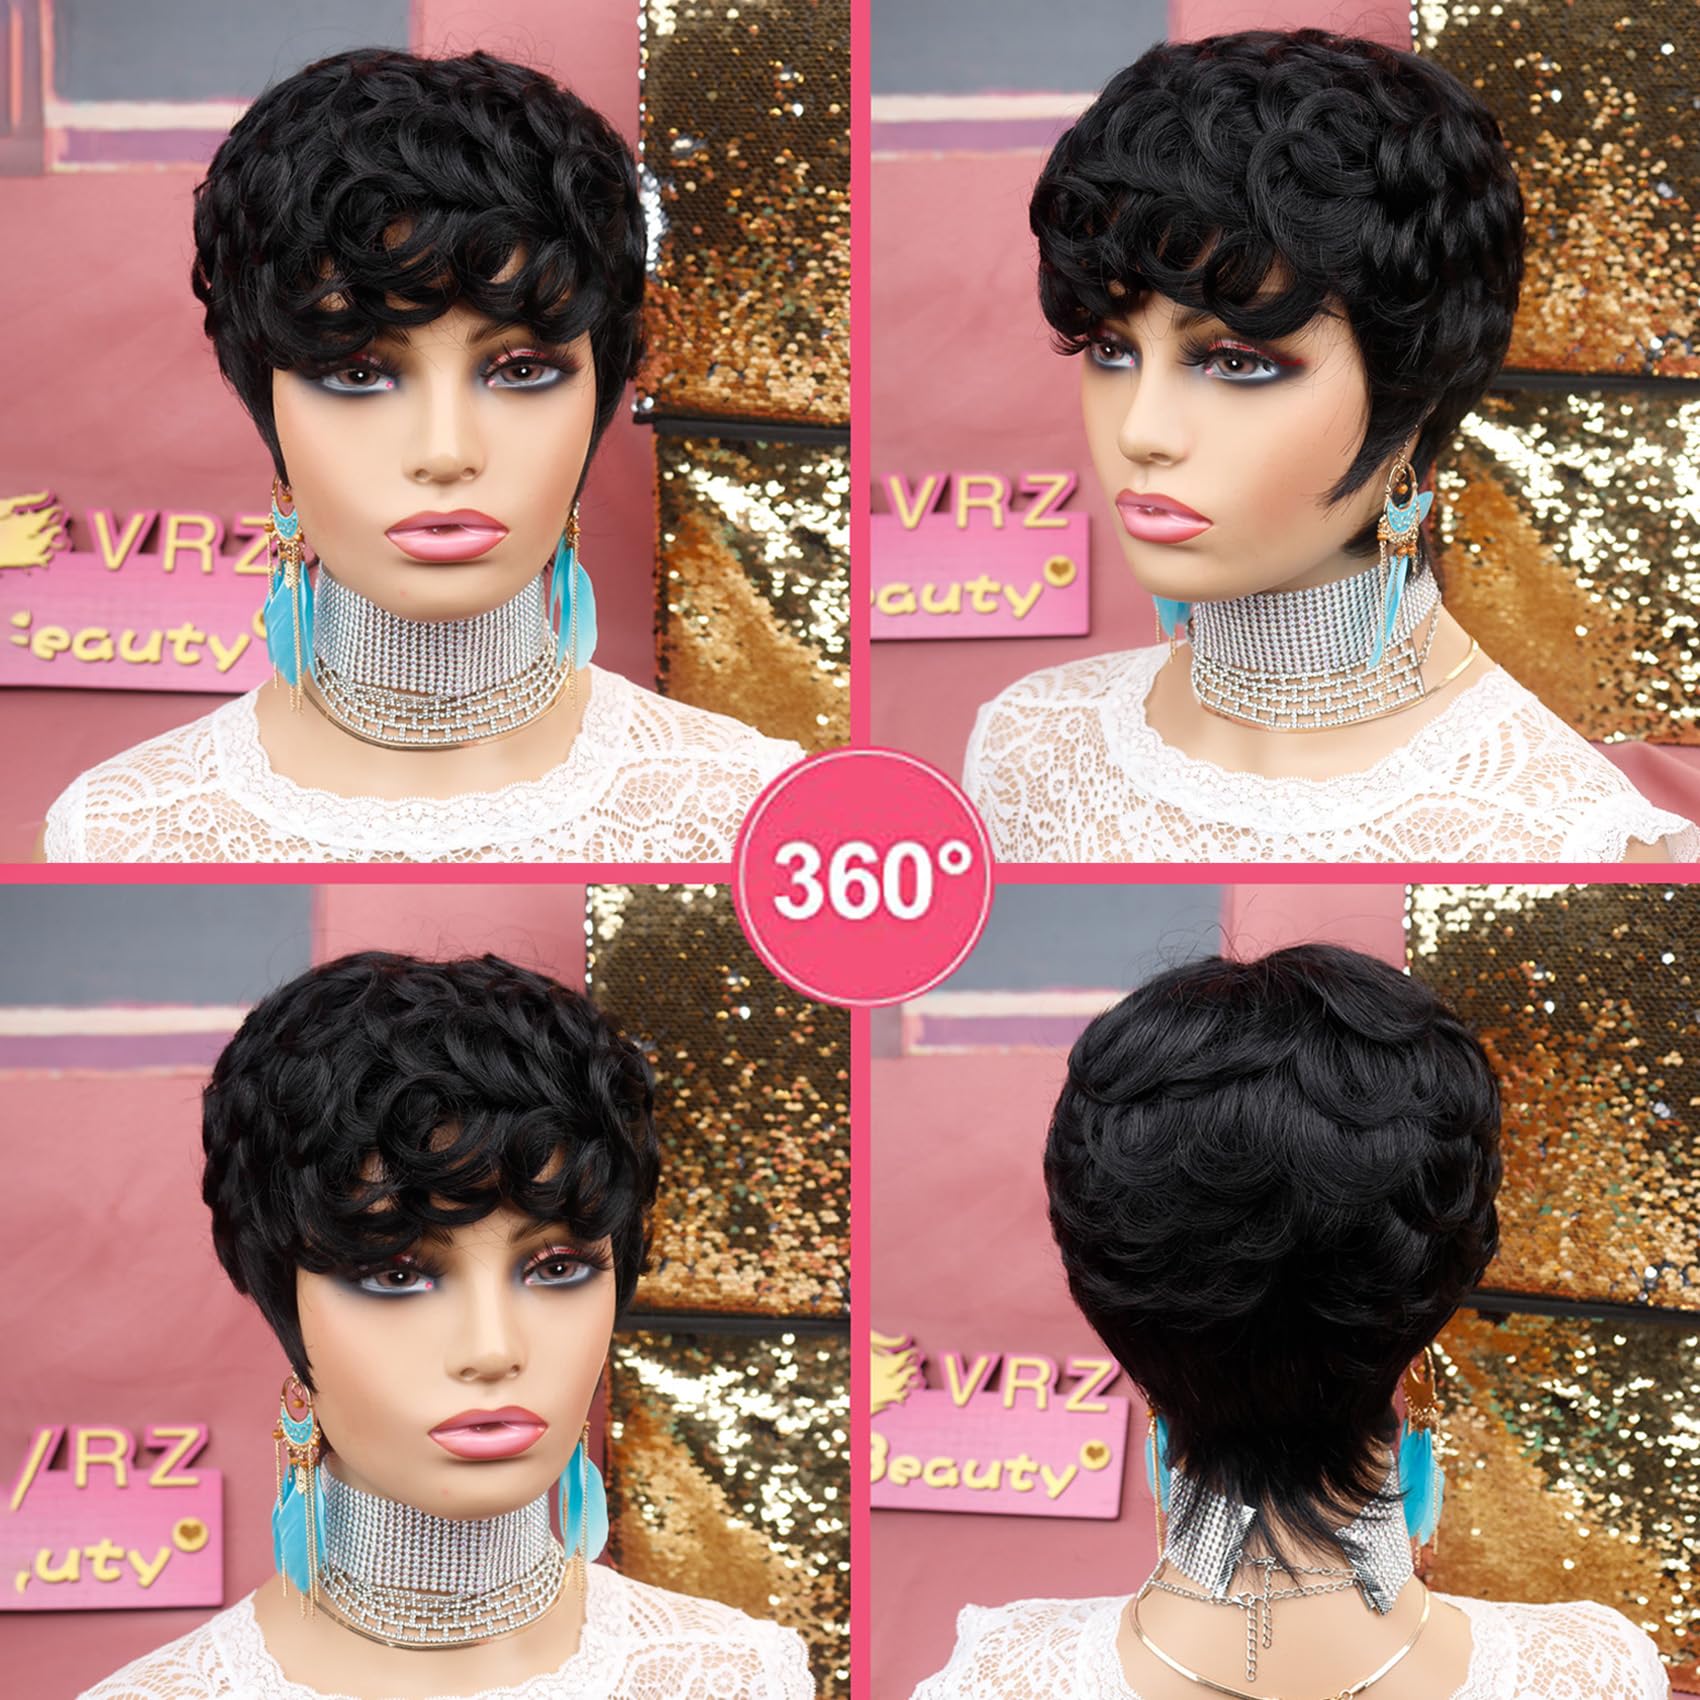 VRZ Short Wigs Human Hair for Black Women Pixie Cut Wig Human Hair with Bangs Layered Wavy Short Human Hair Wigs for Black Women Curly Hair Wigs Color 1B# (MIDDLE WAVY)